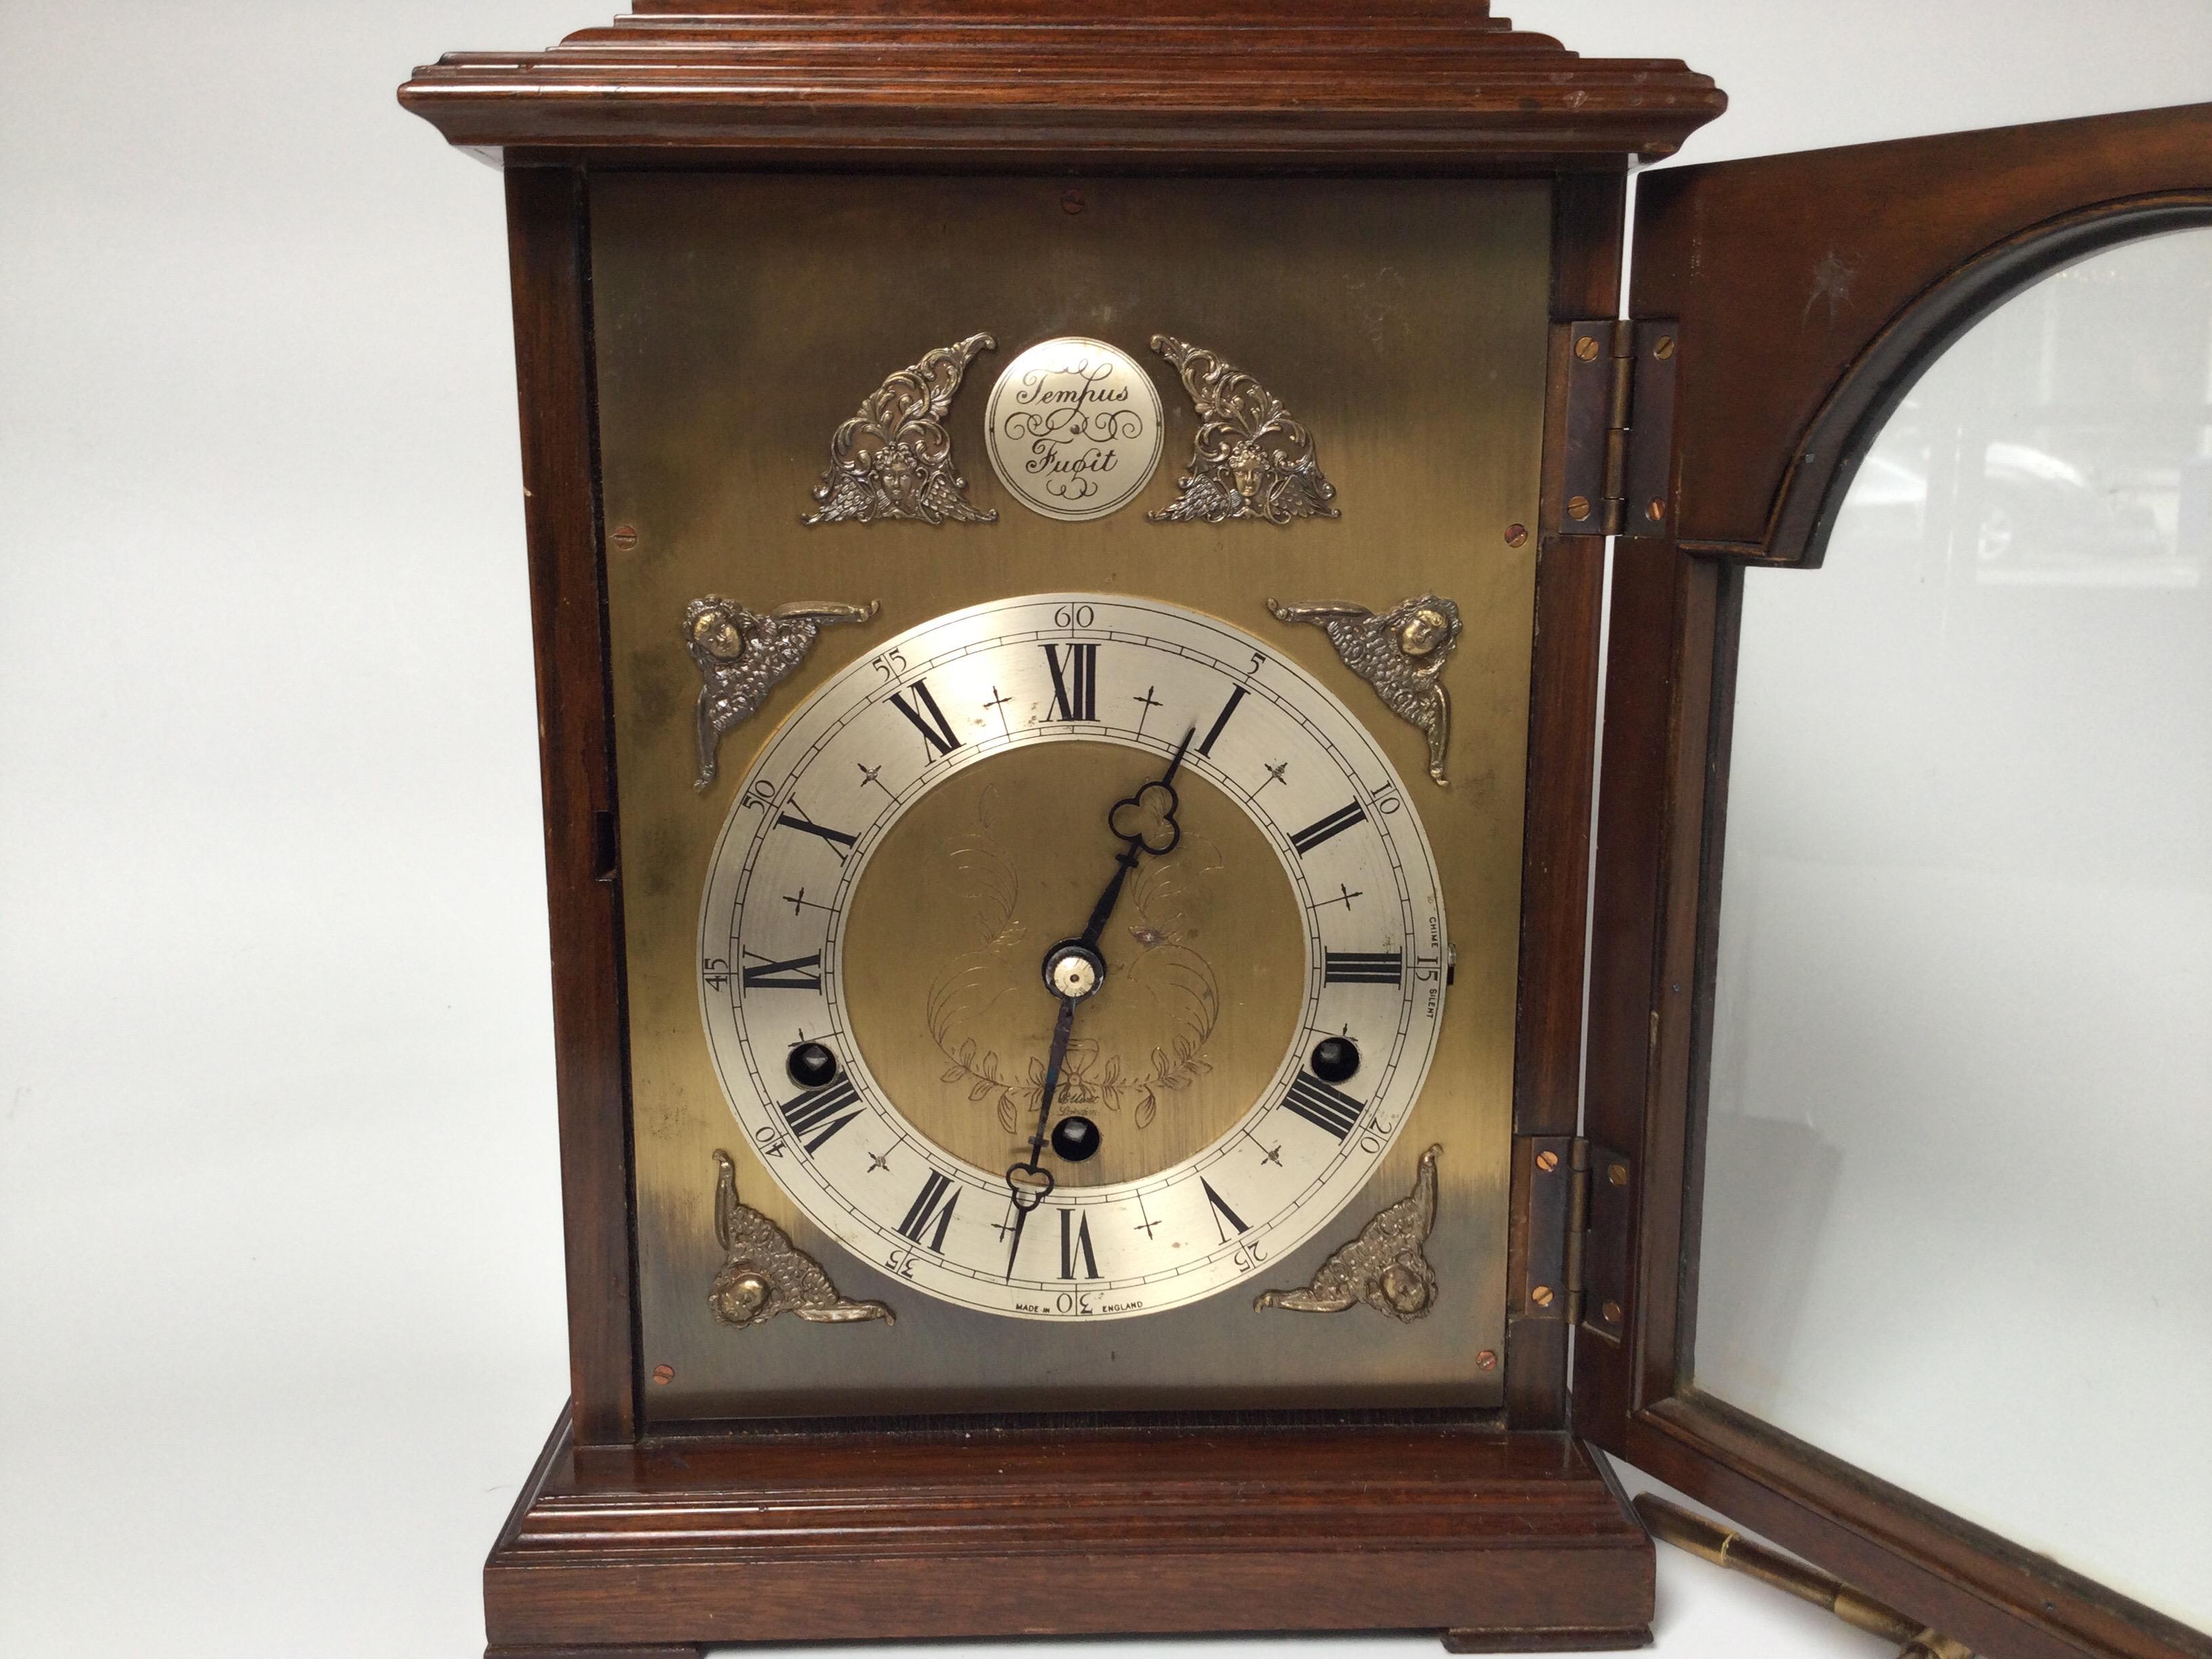 Elegant English bracket clock with mahogany case. Well made and chimes on every quarter hour with either Westminster or Whittington and also a silent feature. Elliott of London was considered the best clock maker in the 20th Century and made clocks